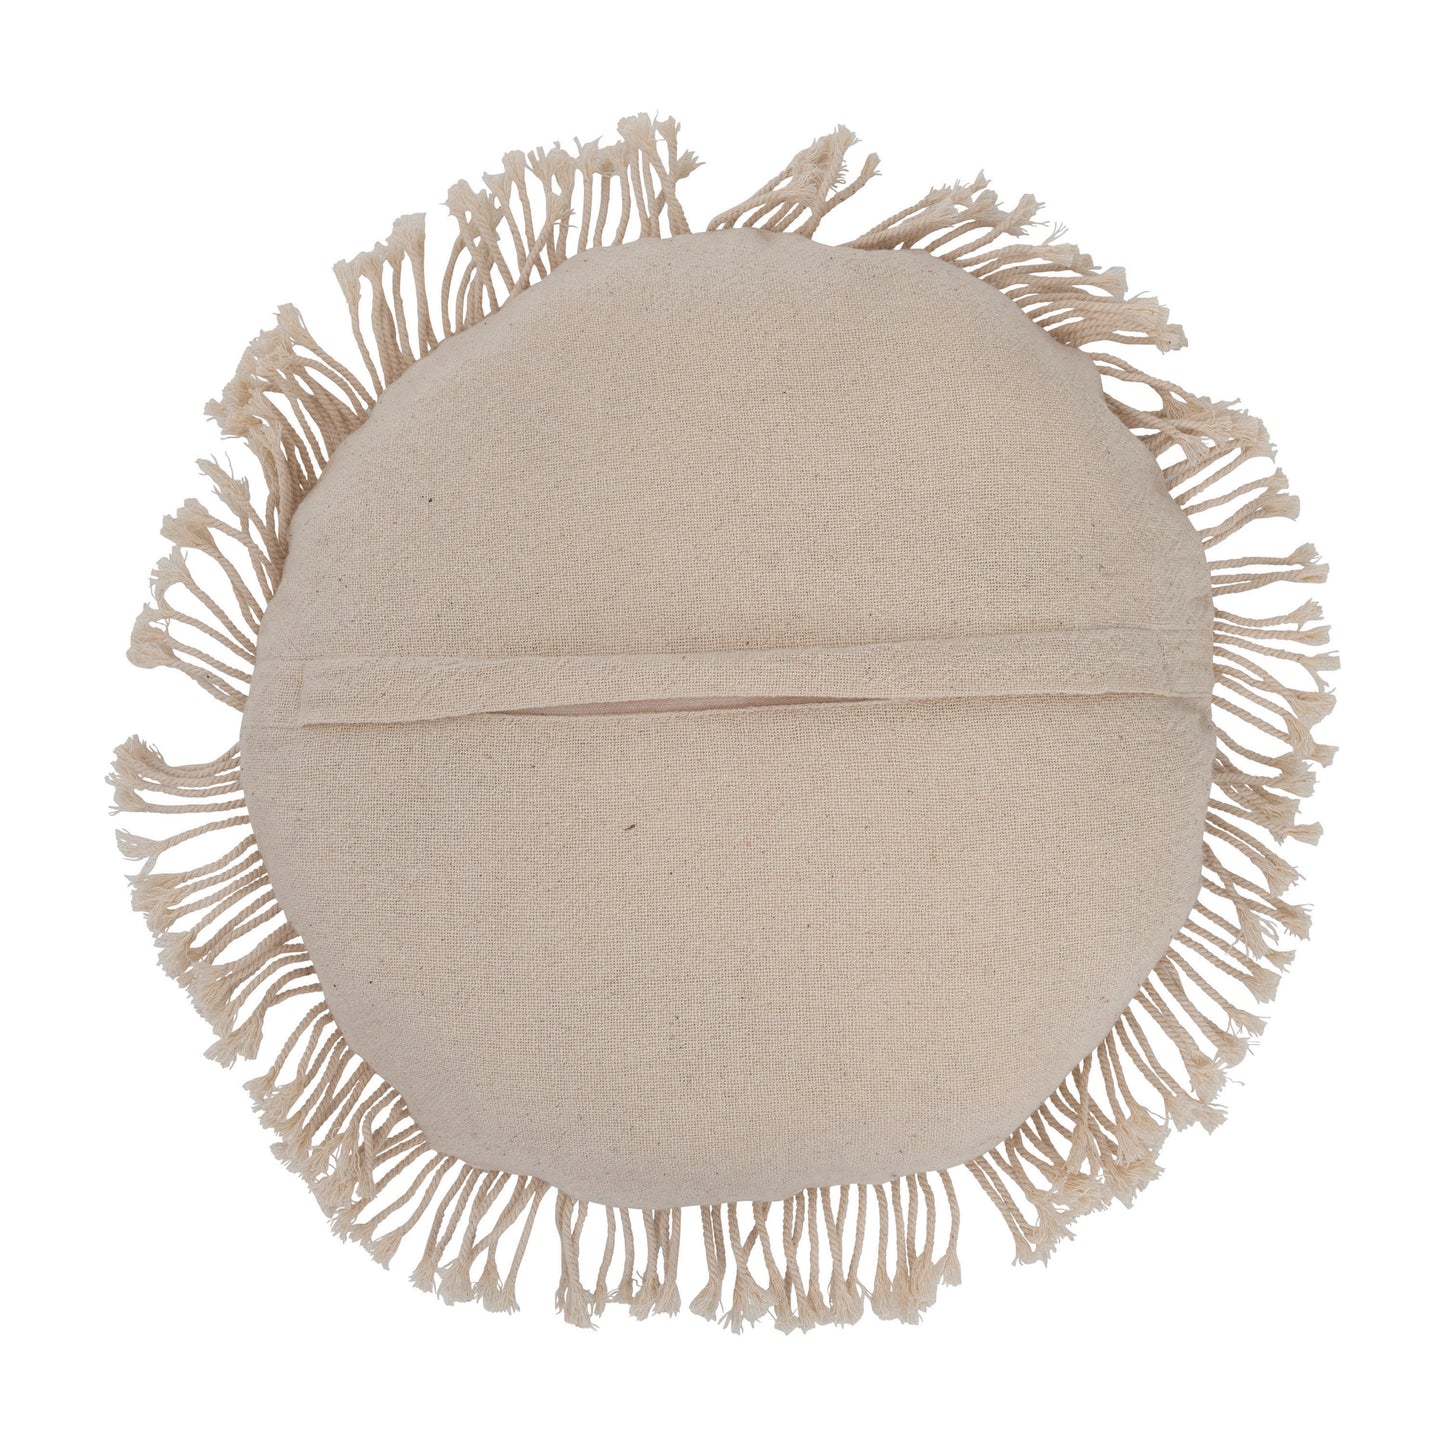 Hand-Woven Cotton and Jute Macrame Pillow with Fringe